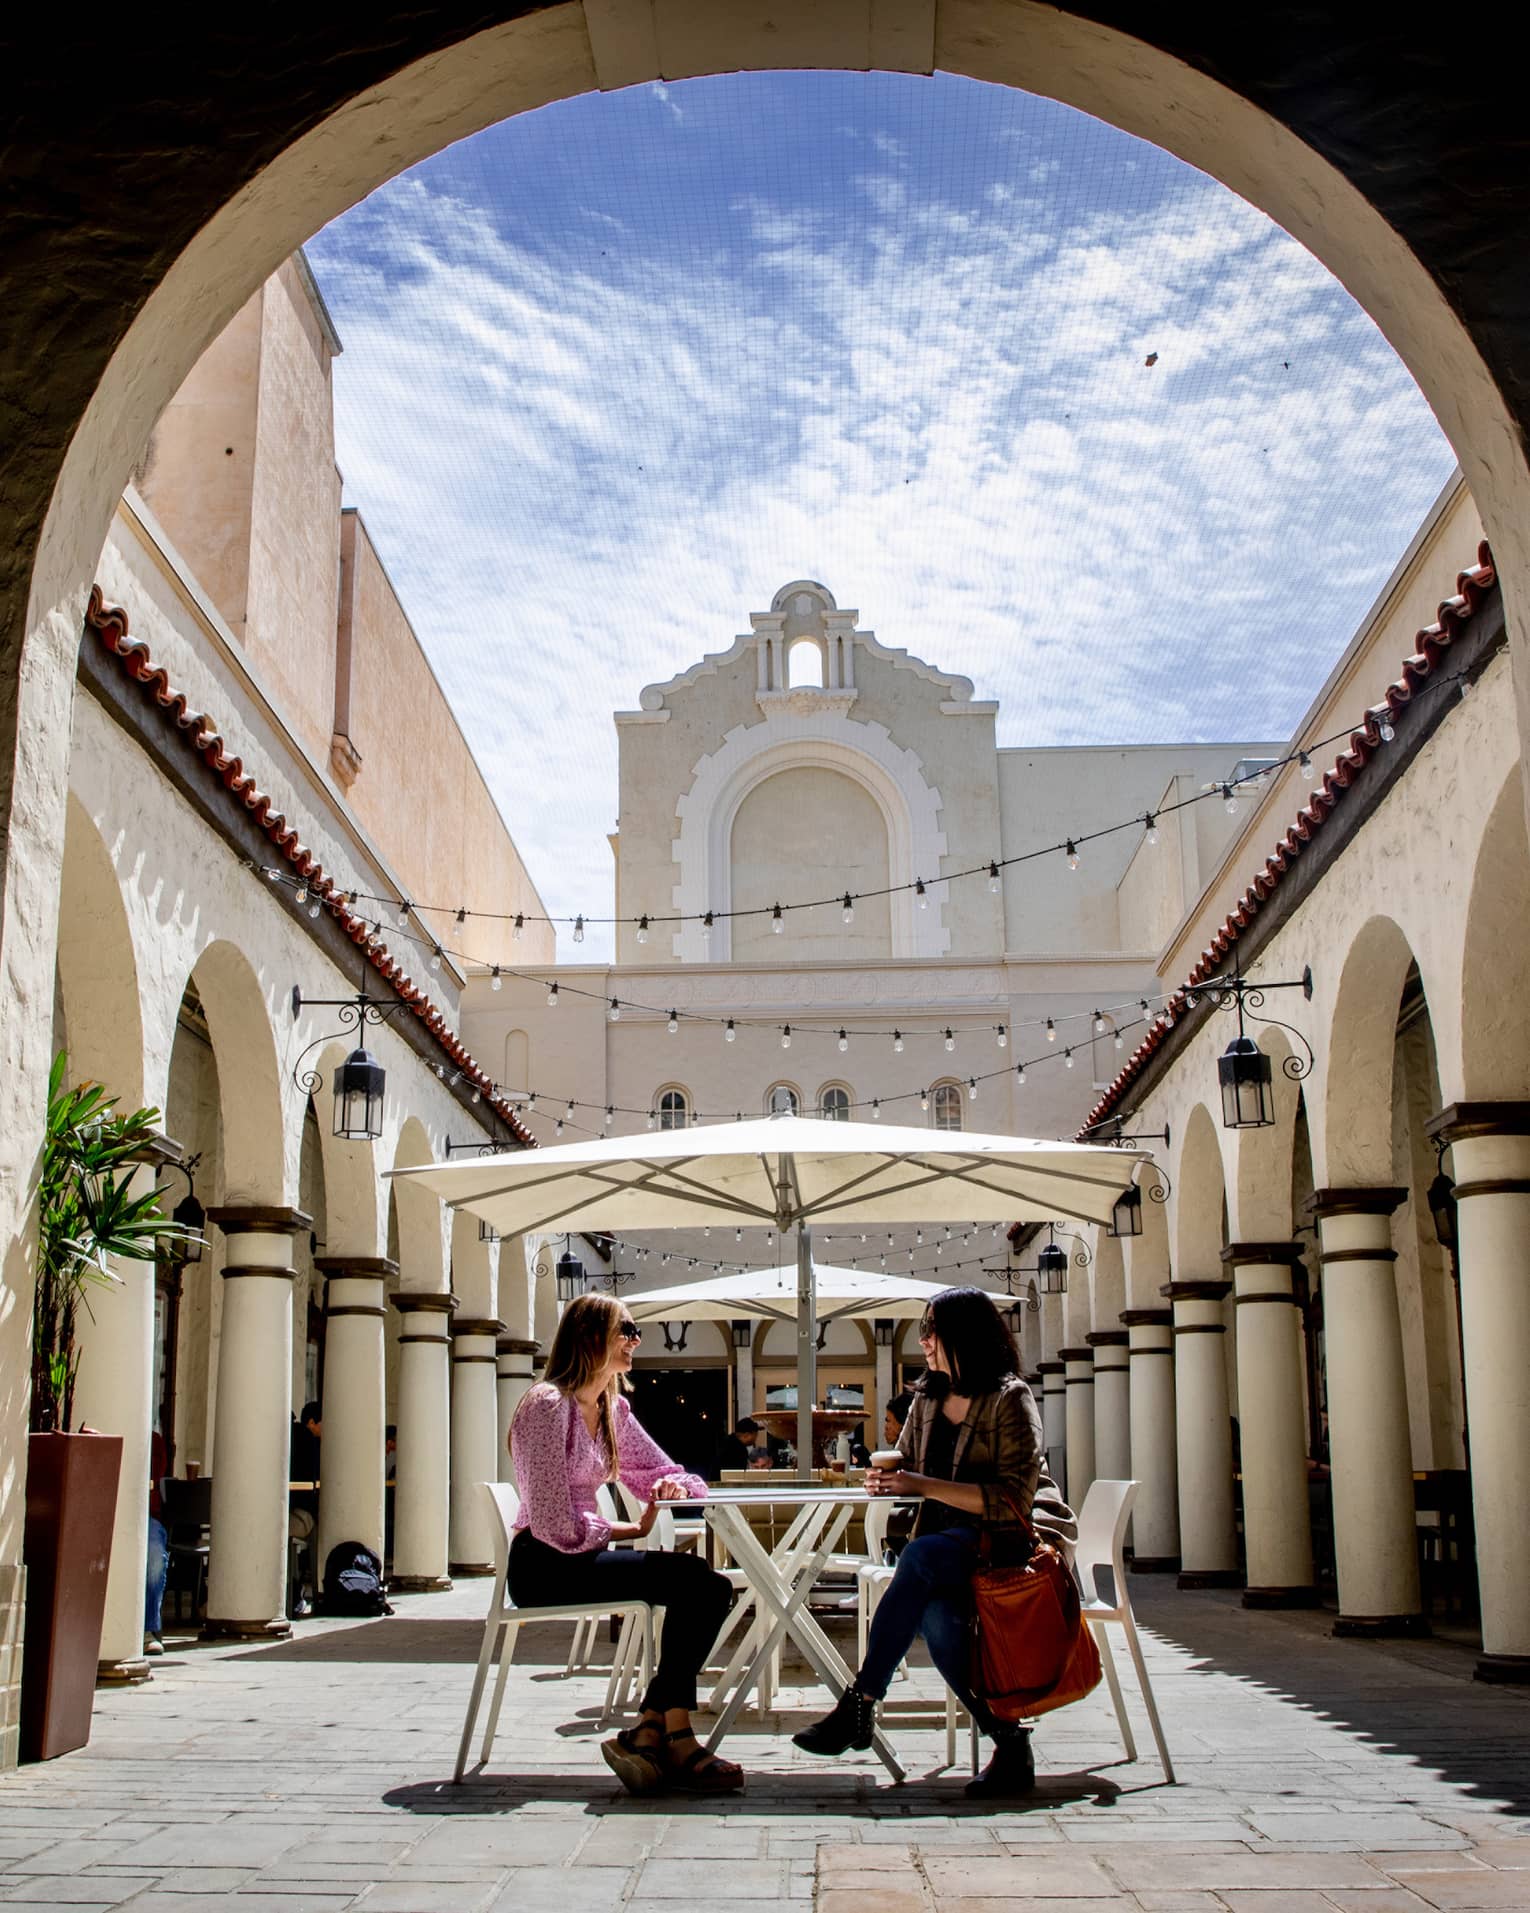 Two people sitting outside under an archway.